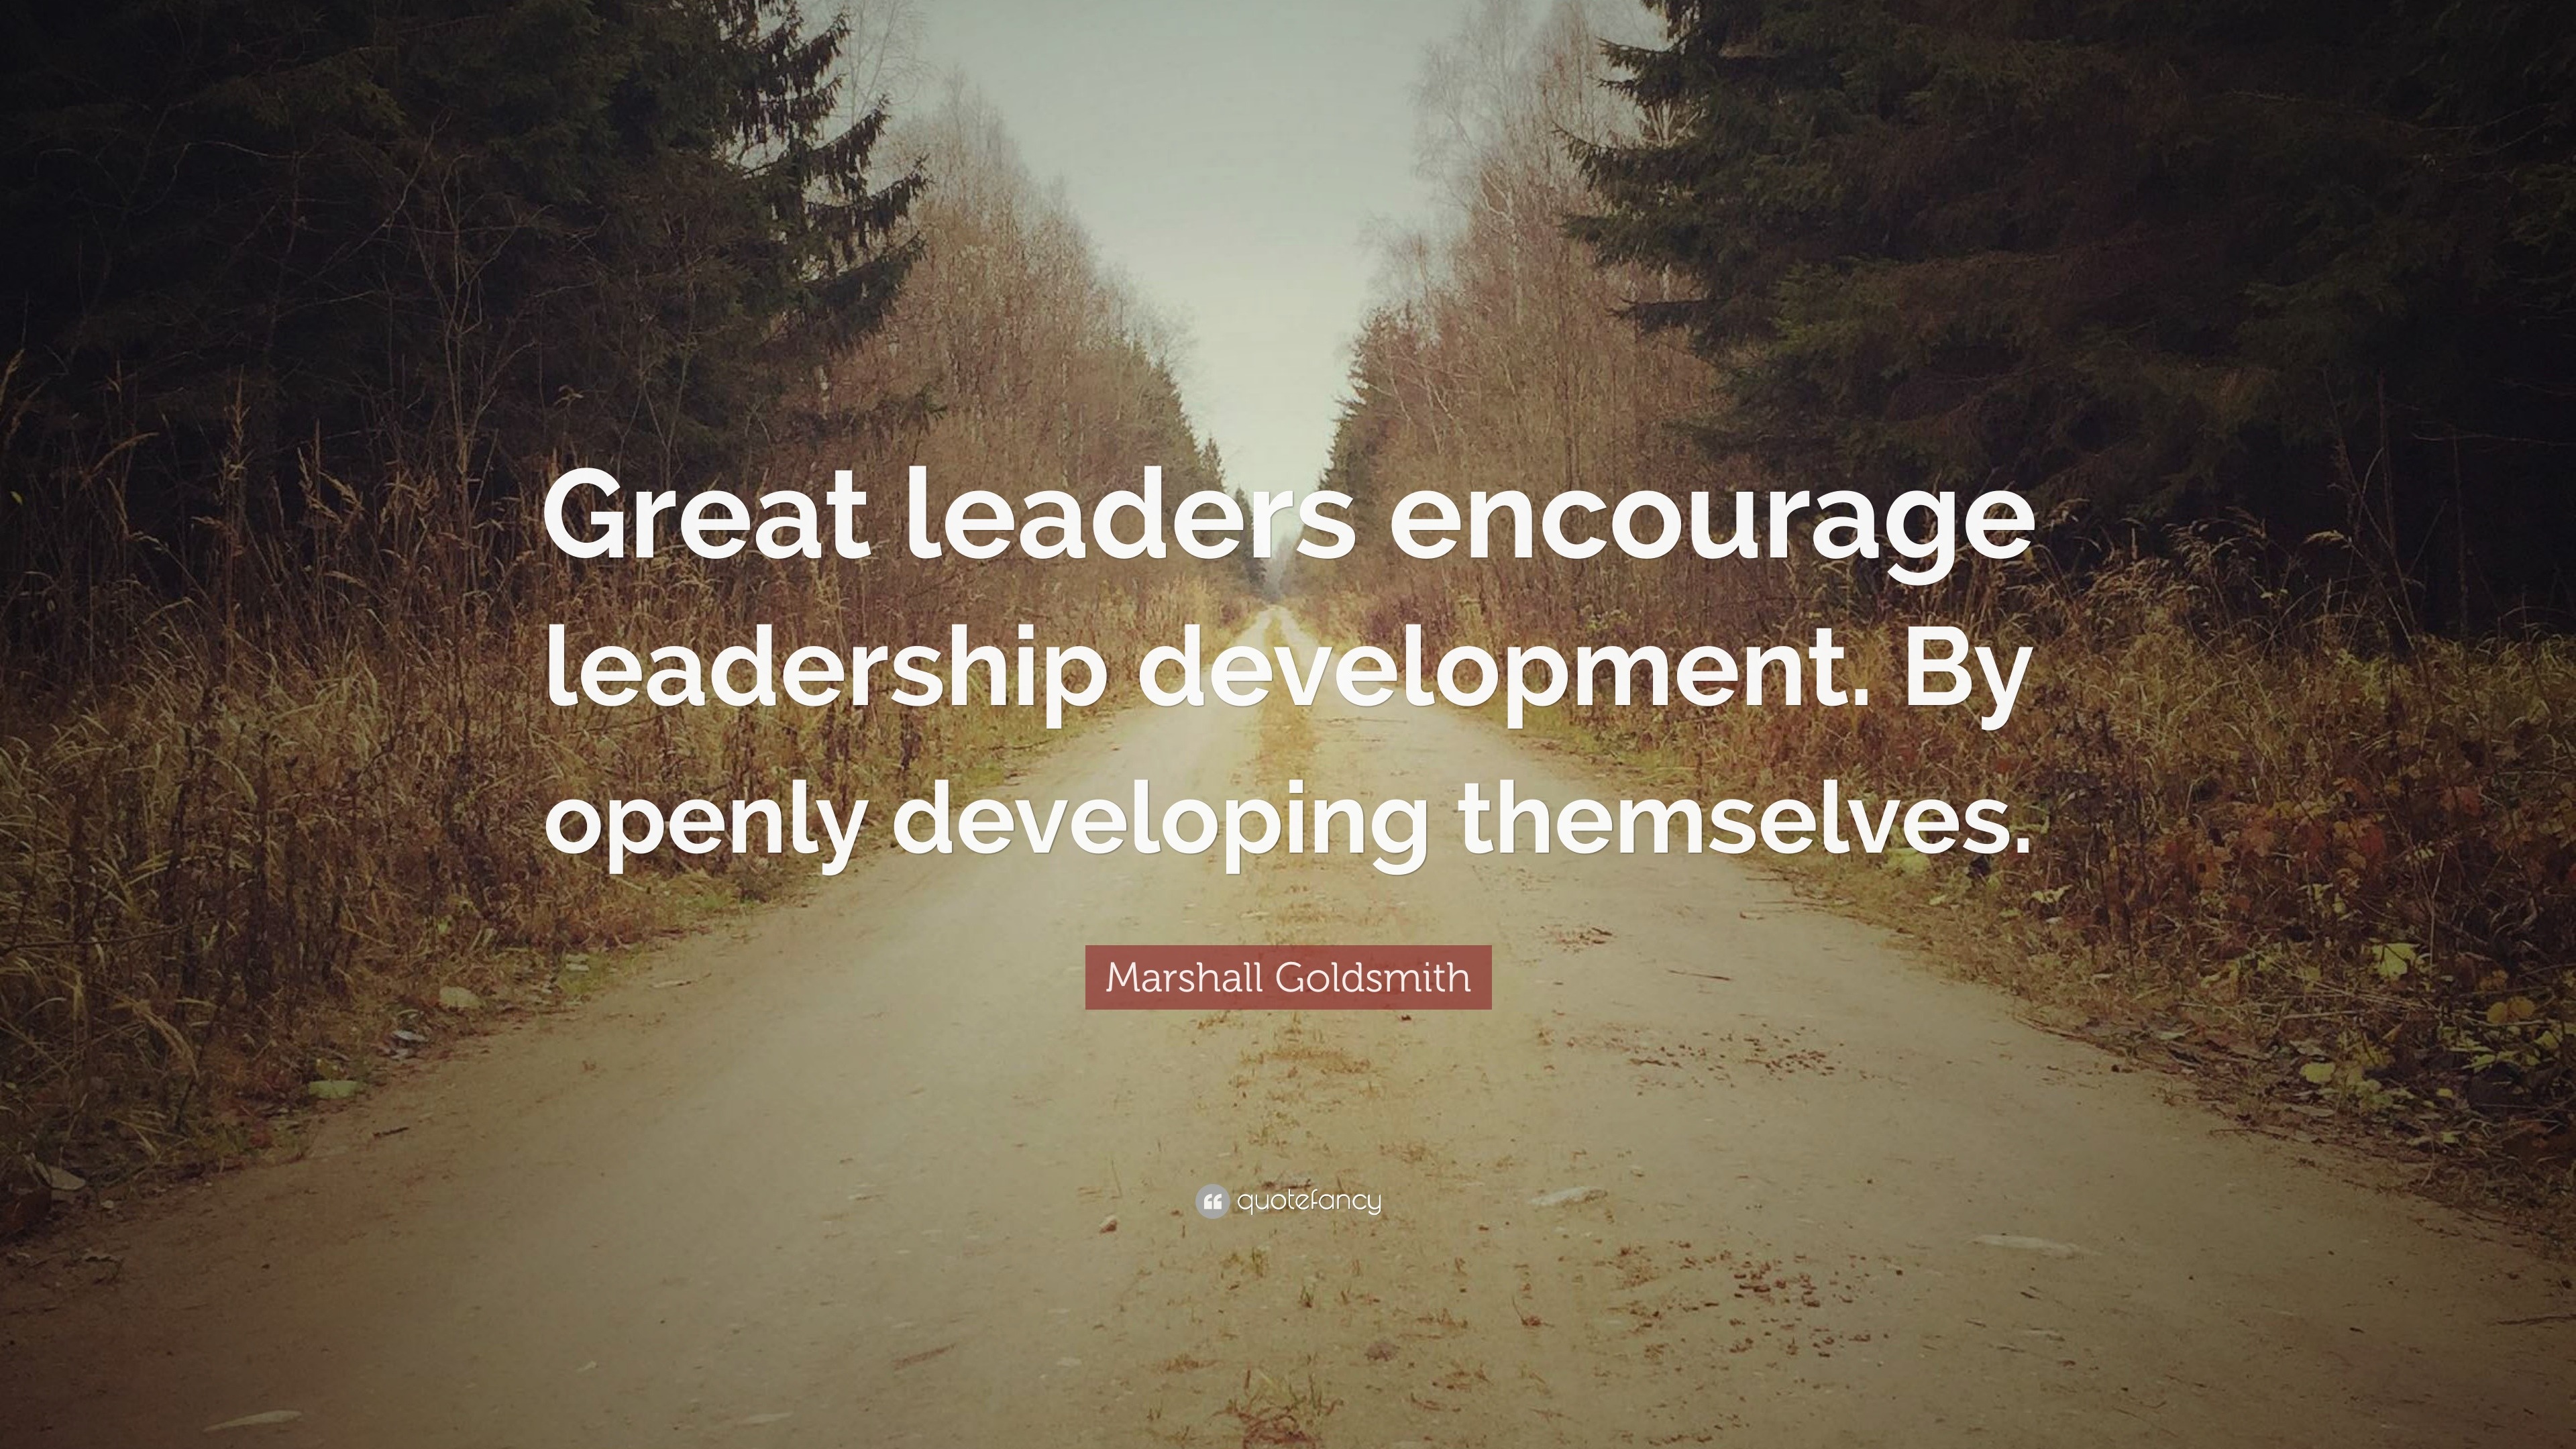 Amazing Leadership Development Quotes in the world The ultimate guide 